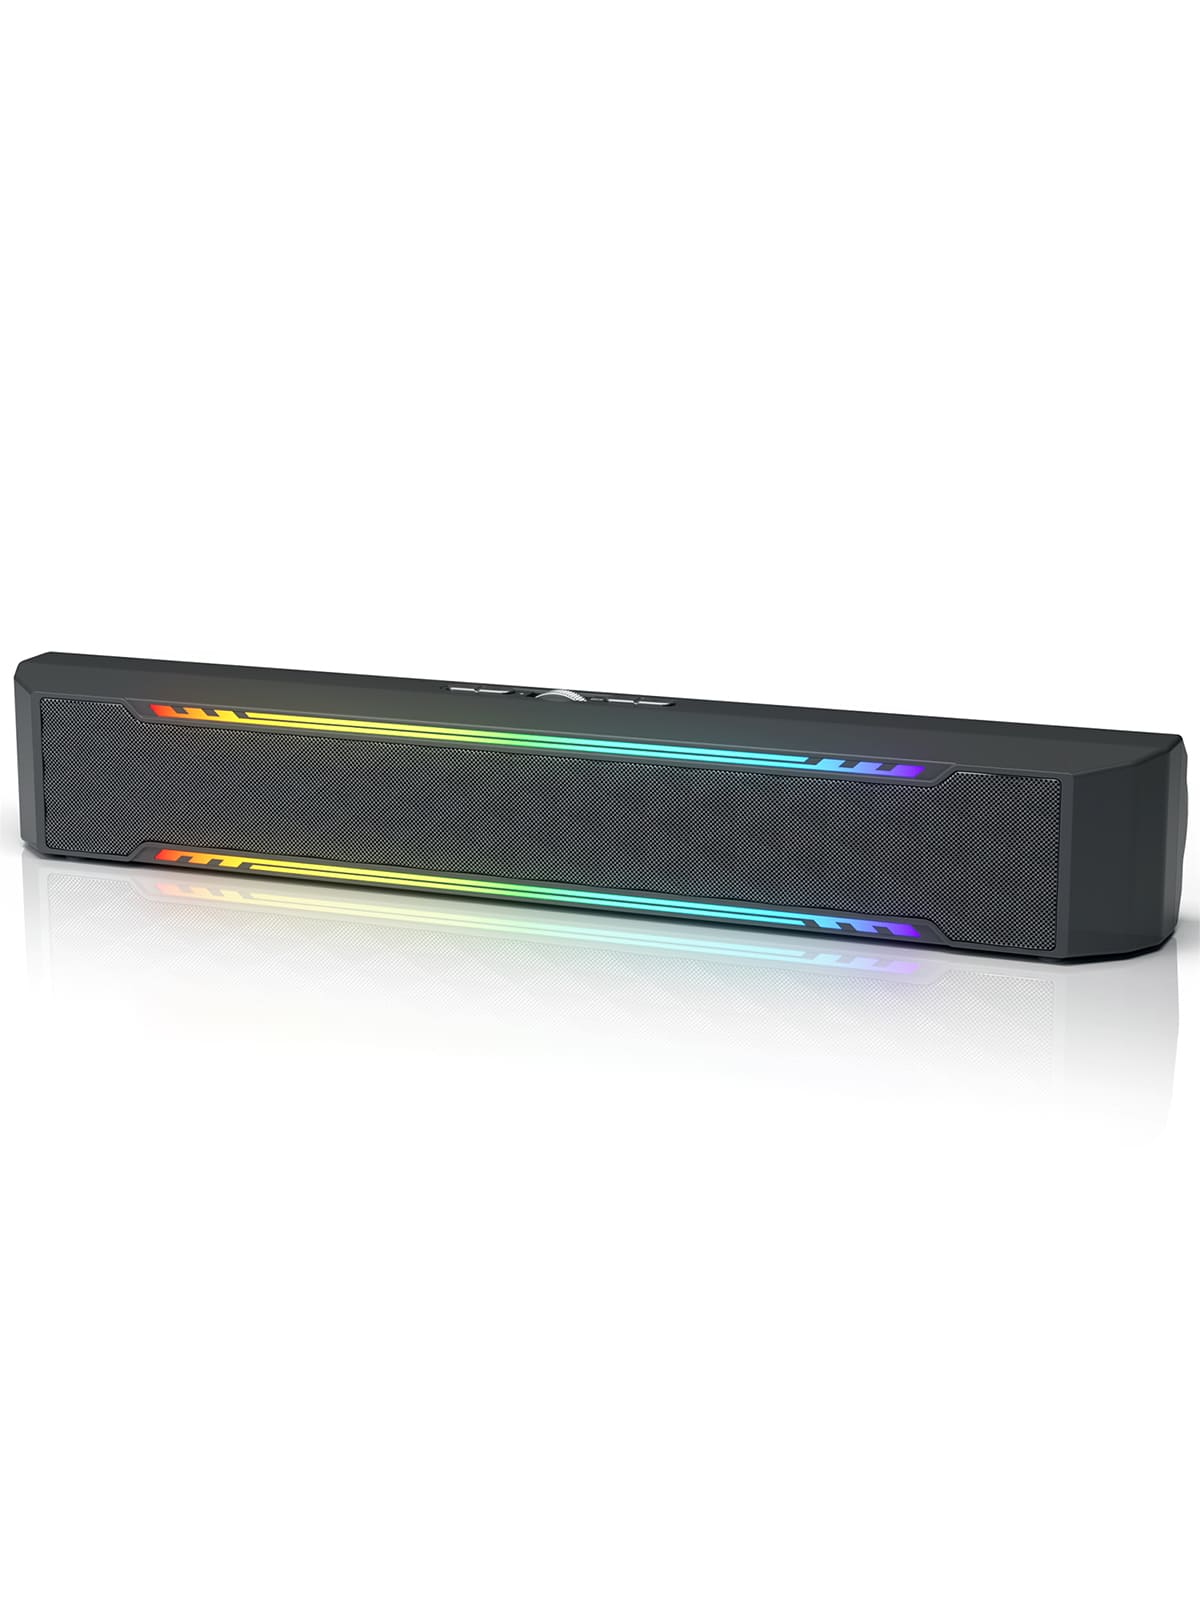 Fosi Audio C4 Computer Speakers for Desktop, PC Gaming Sound Bar Desk Speaker for Monitor, Portable Wireless Bluetooth Soundbar with Dynamic RGB for Laptop - Fosi Audio